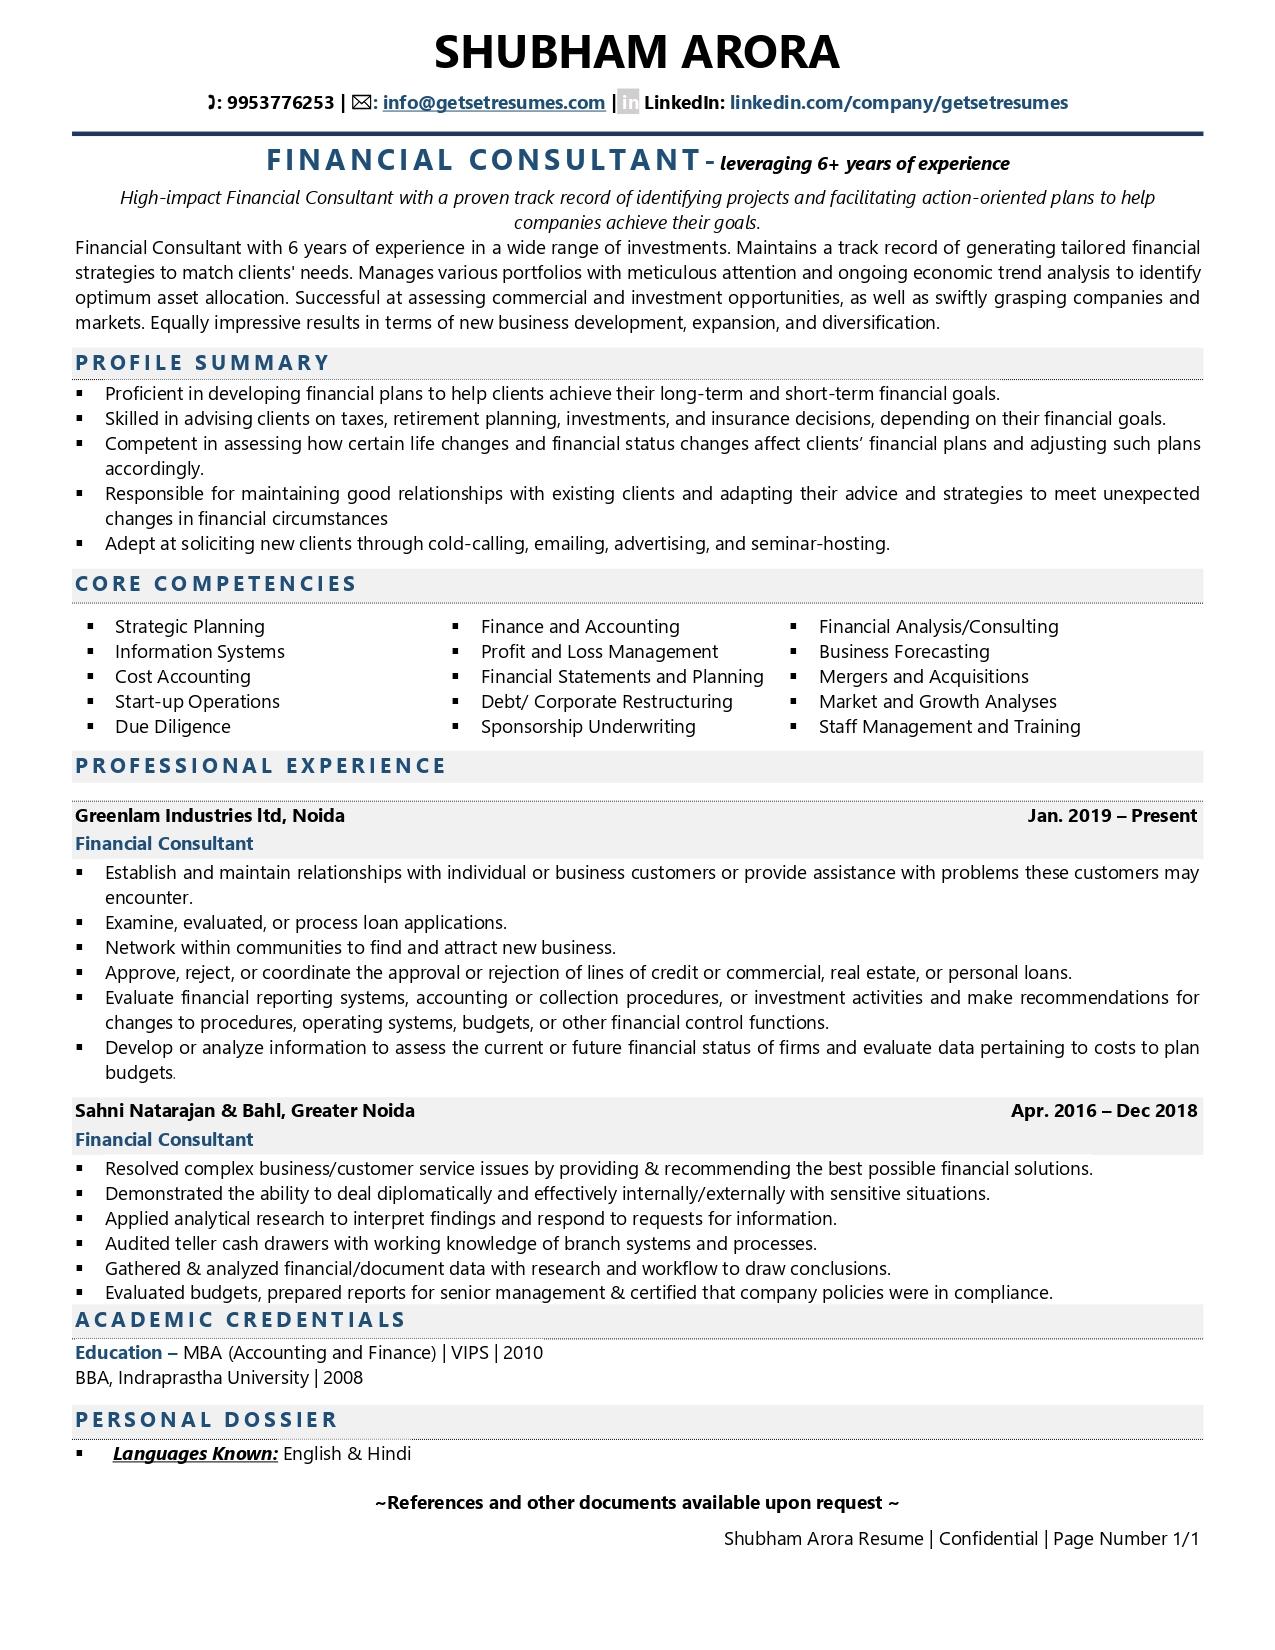 Financial Consultant - Resume Example & Template